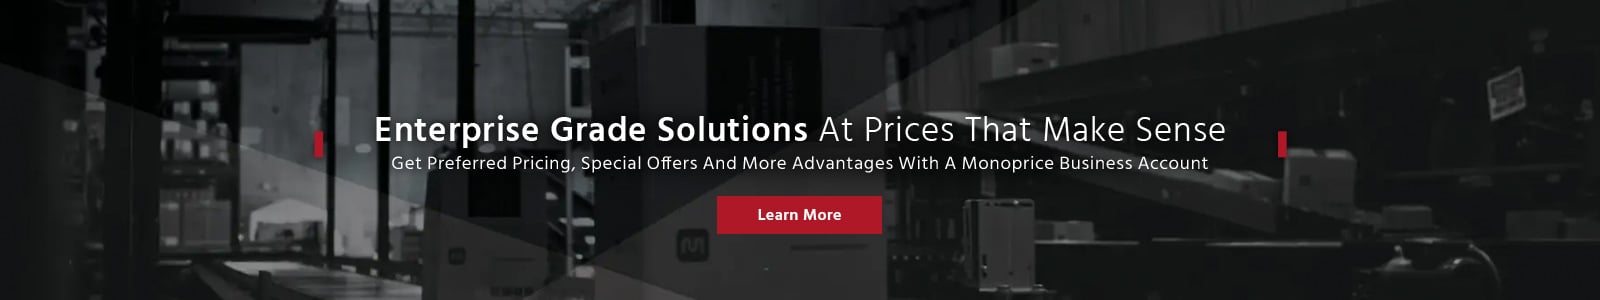 Enterprise Grade Solutions At Prices That Make Sense
Get Preferred Pricing, Special Offers And More Advantages With A Monoprice Business Account
Learn More